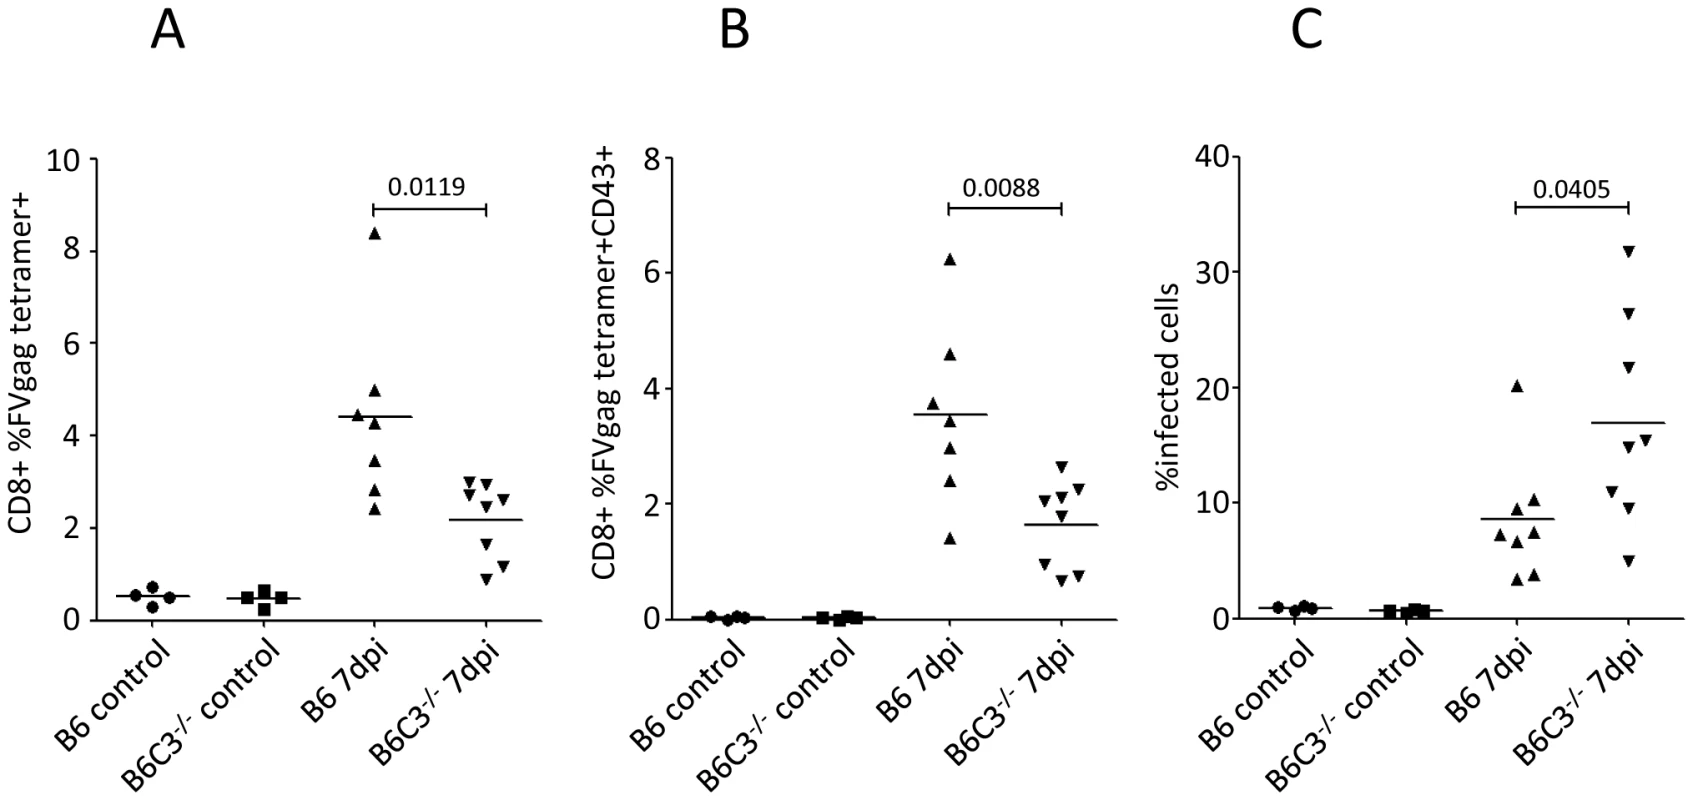 Pronounced FV-infection in C3-deficient mice correlates with a lower frequency of FV-specific CTLs.